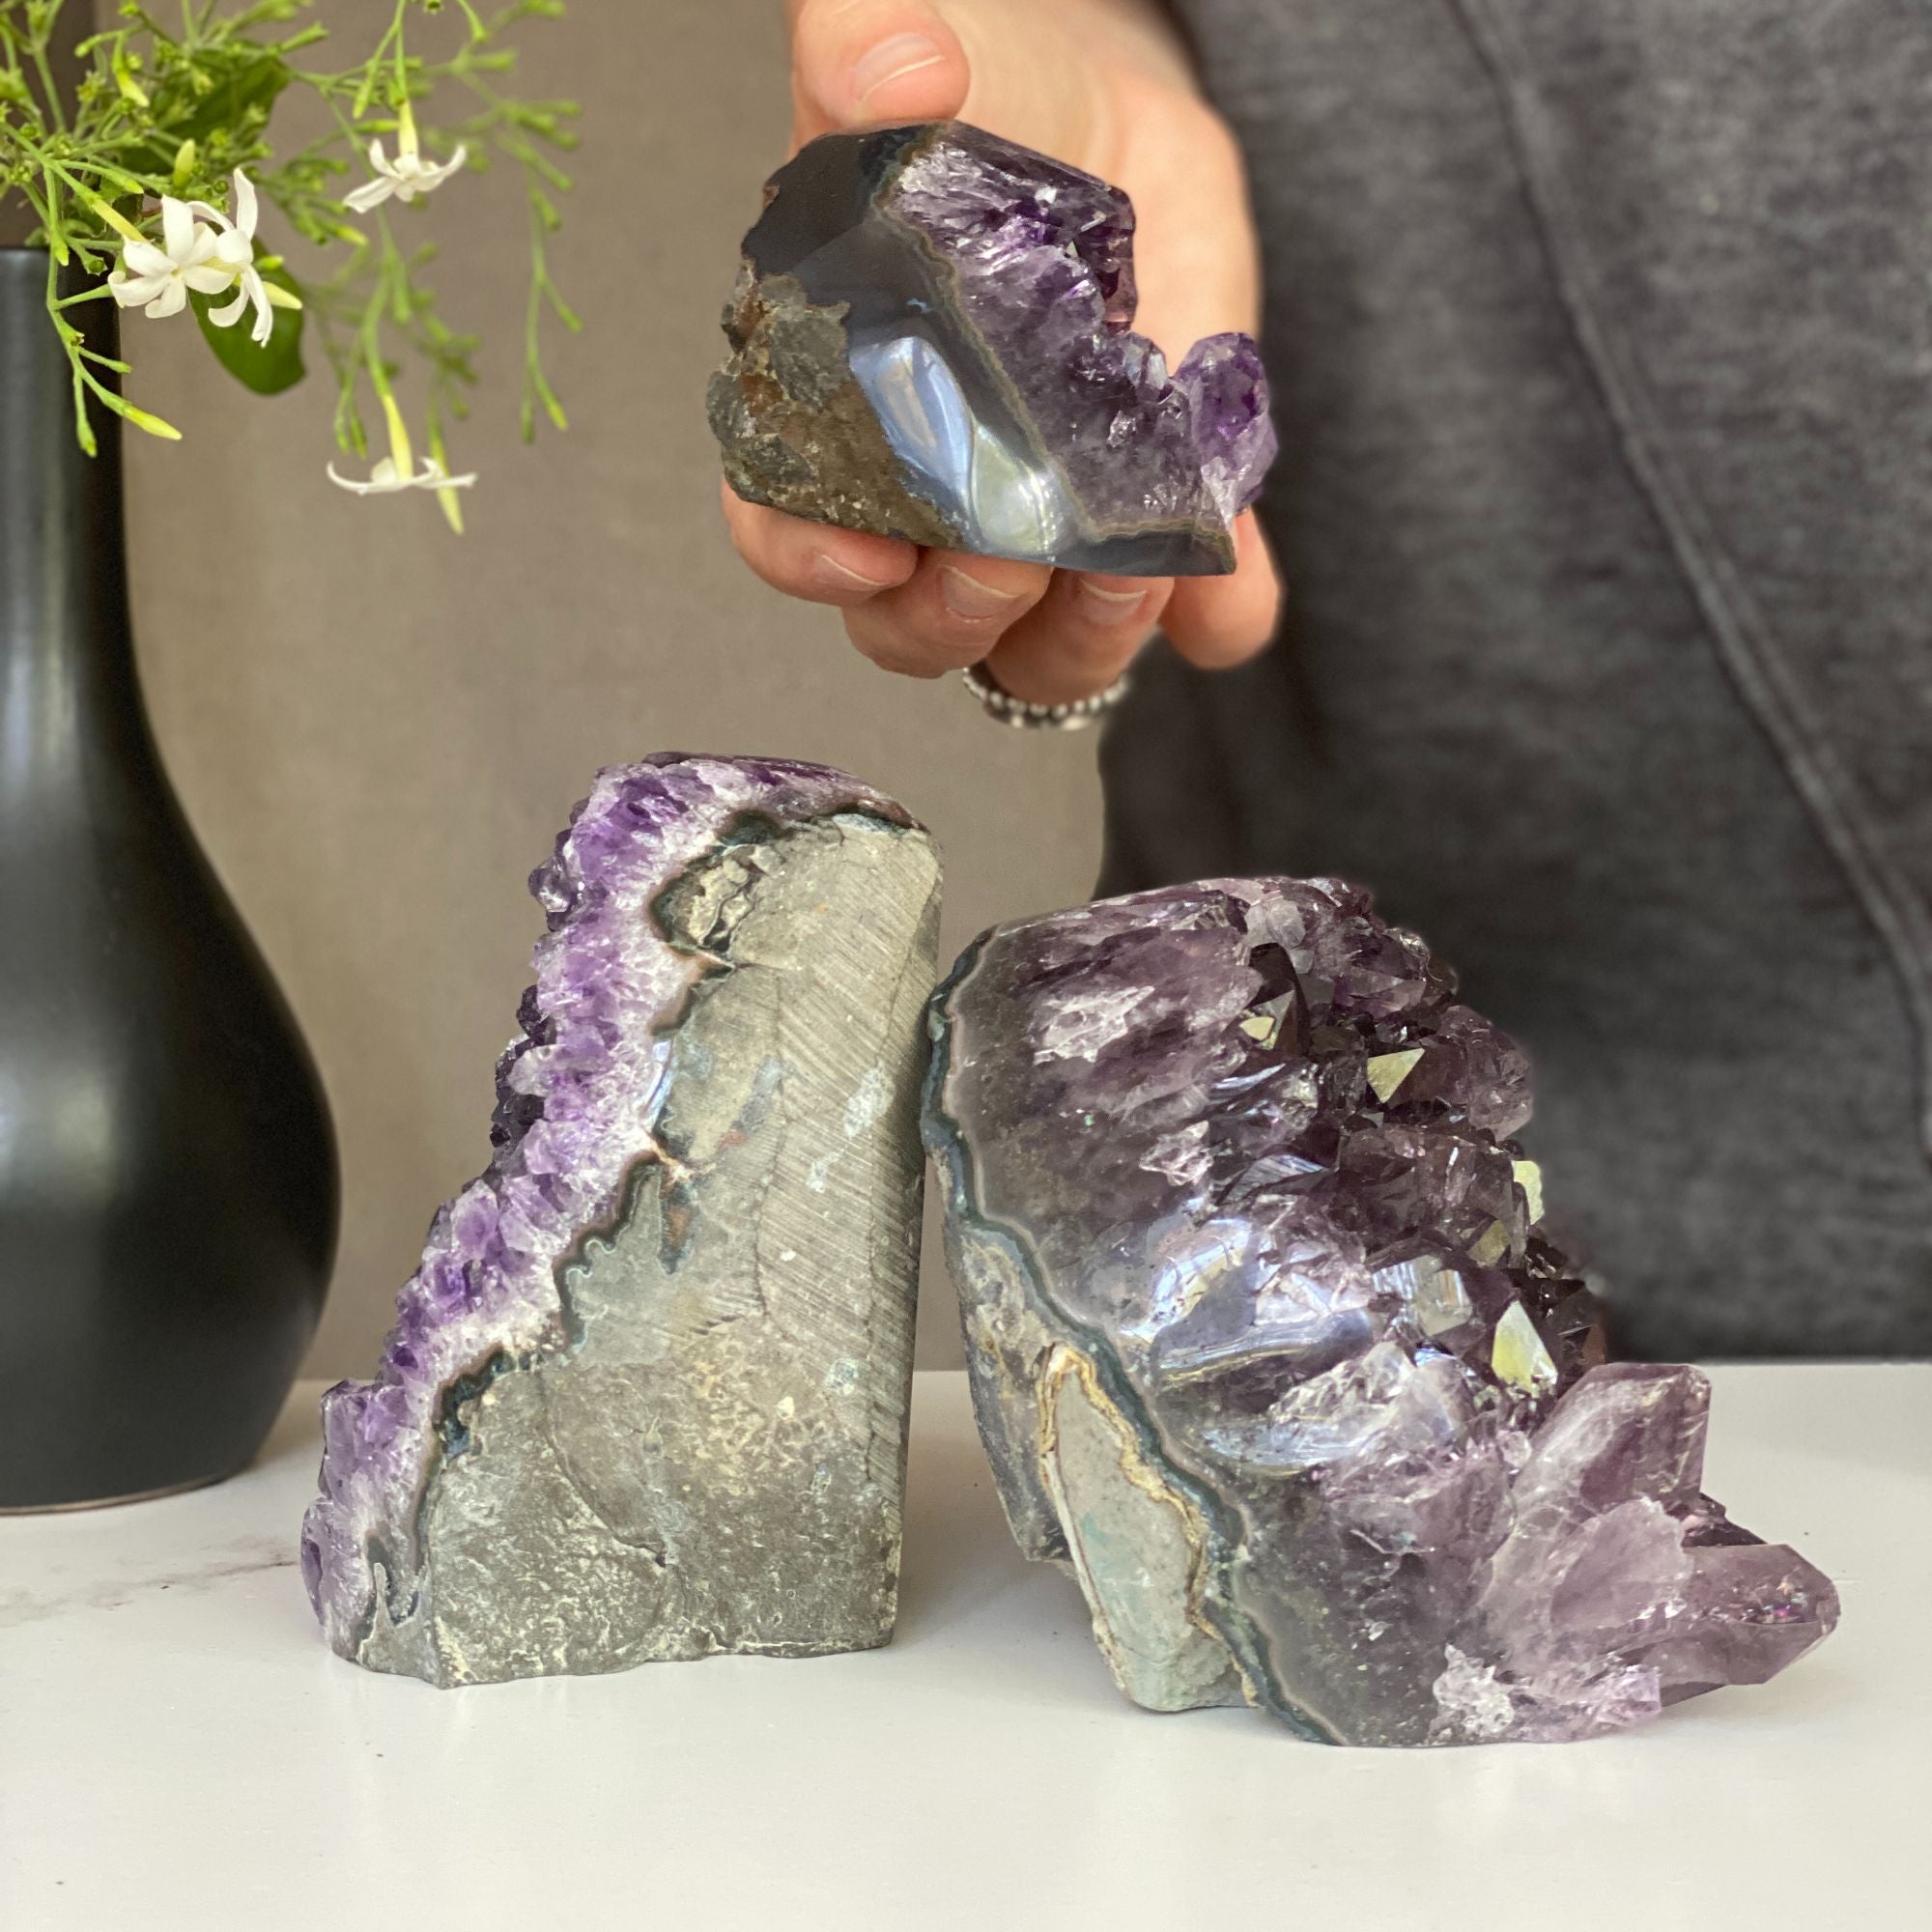 Amethyst geode set, 3 pieces of natural anxiety crystals, amethyst stones with agate edges, perfect for mediatation altar and home decor